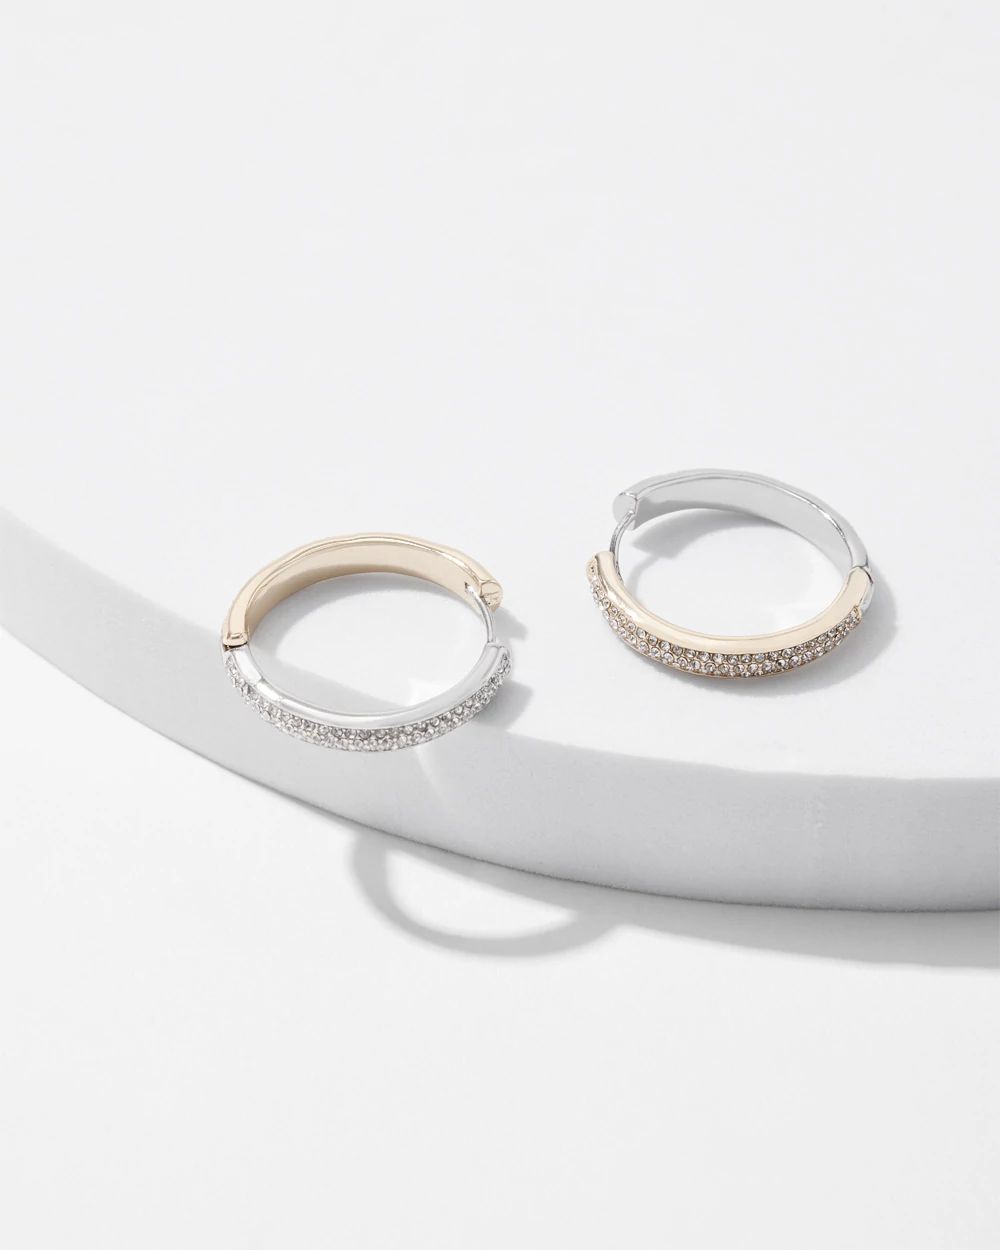 Mixed Metal Reversible Medium Pave Hoop Earrings click to view larger image.